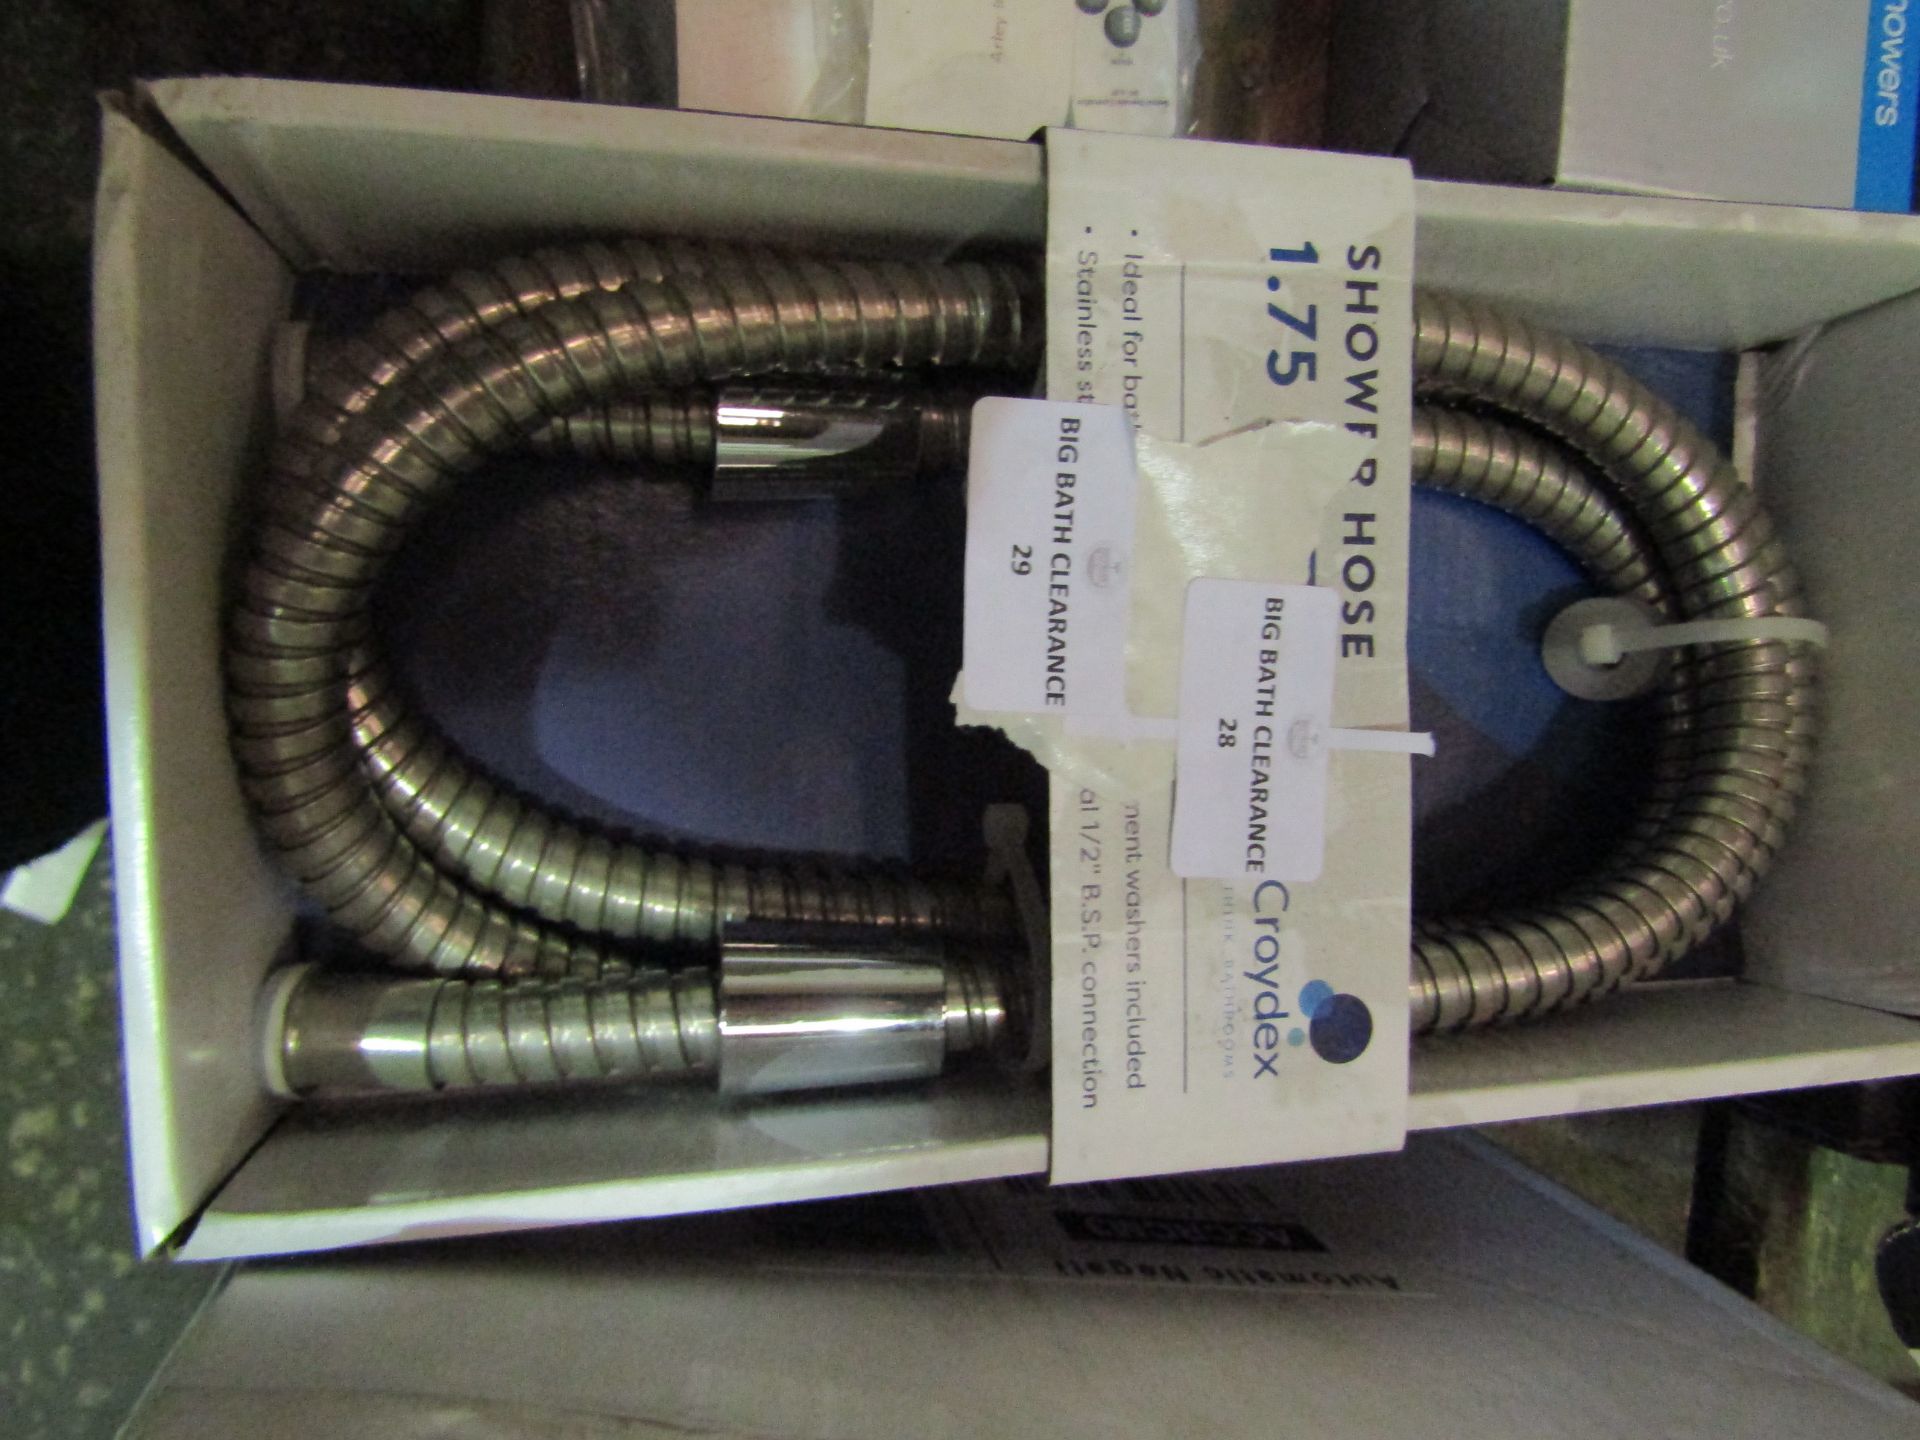 Croydex - Stainless Steel Shower Hose 1.75m - New & Boxed.